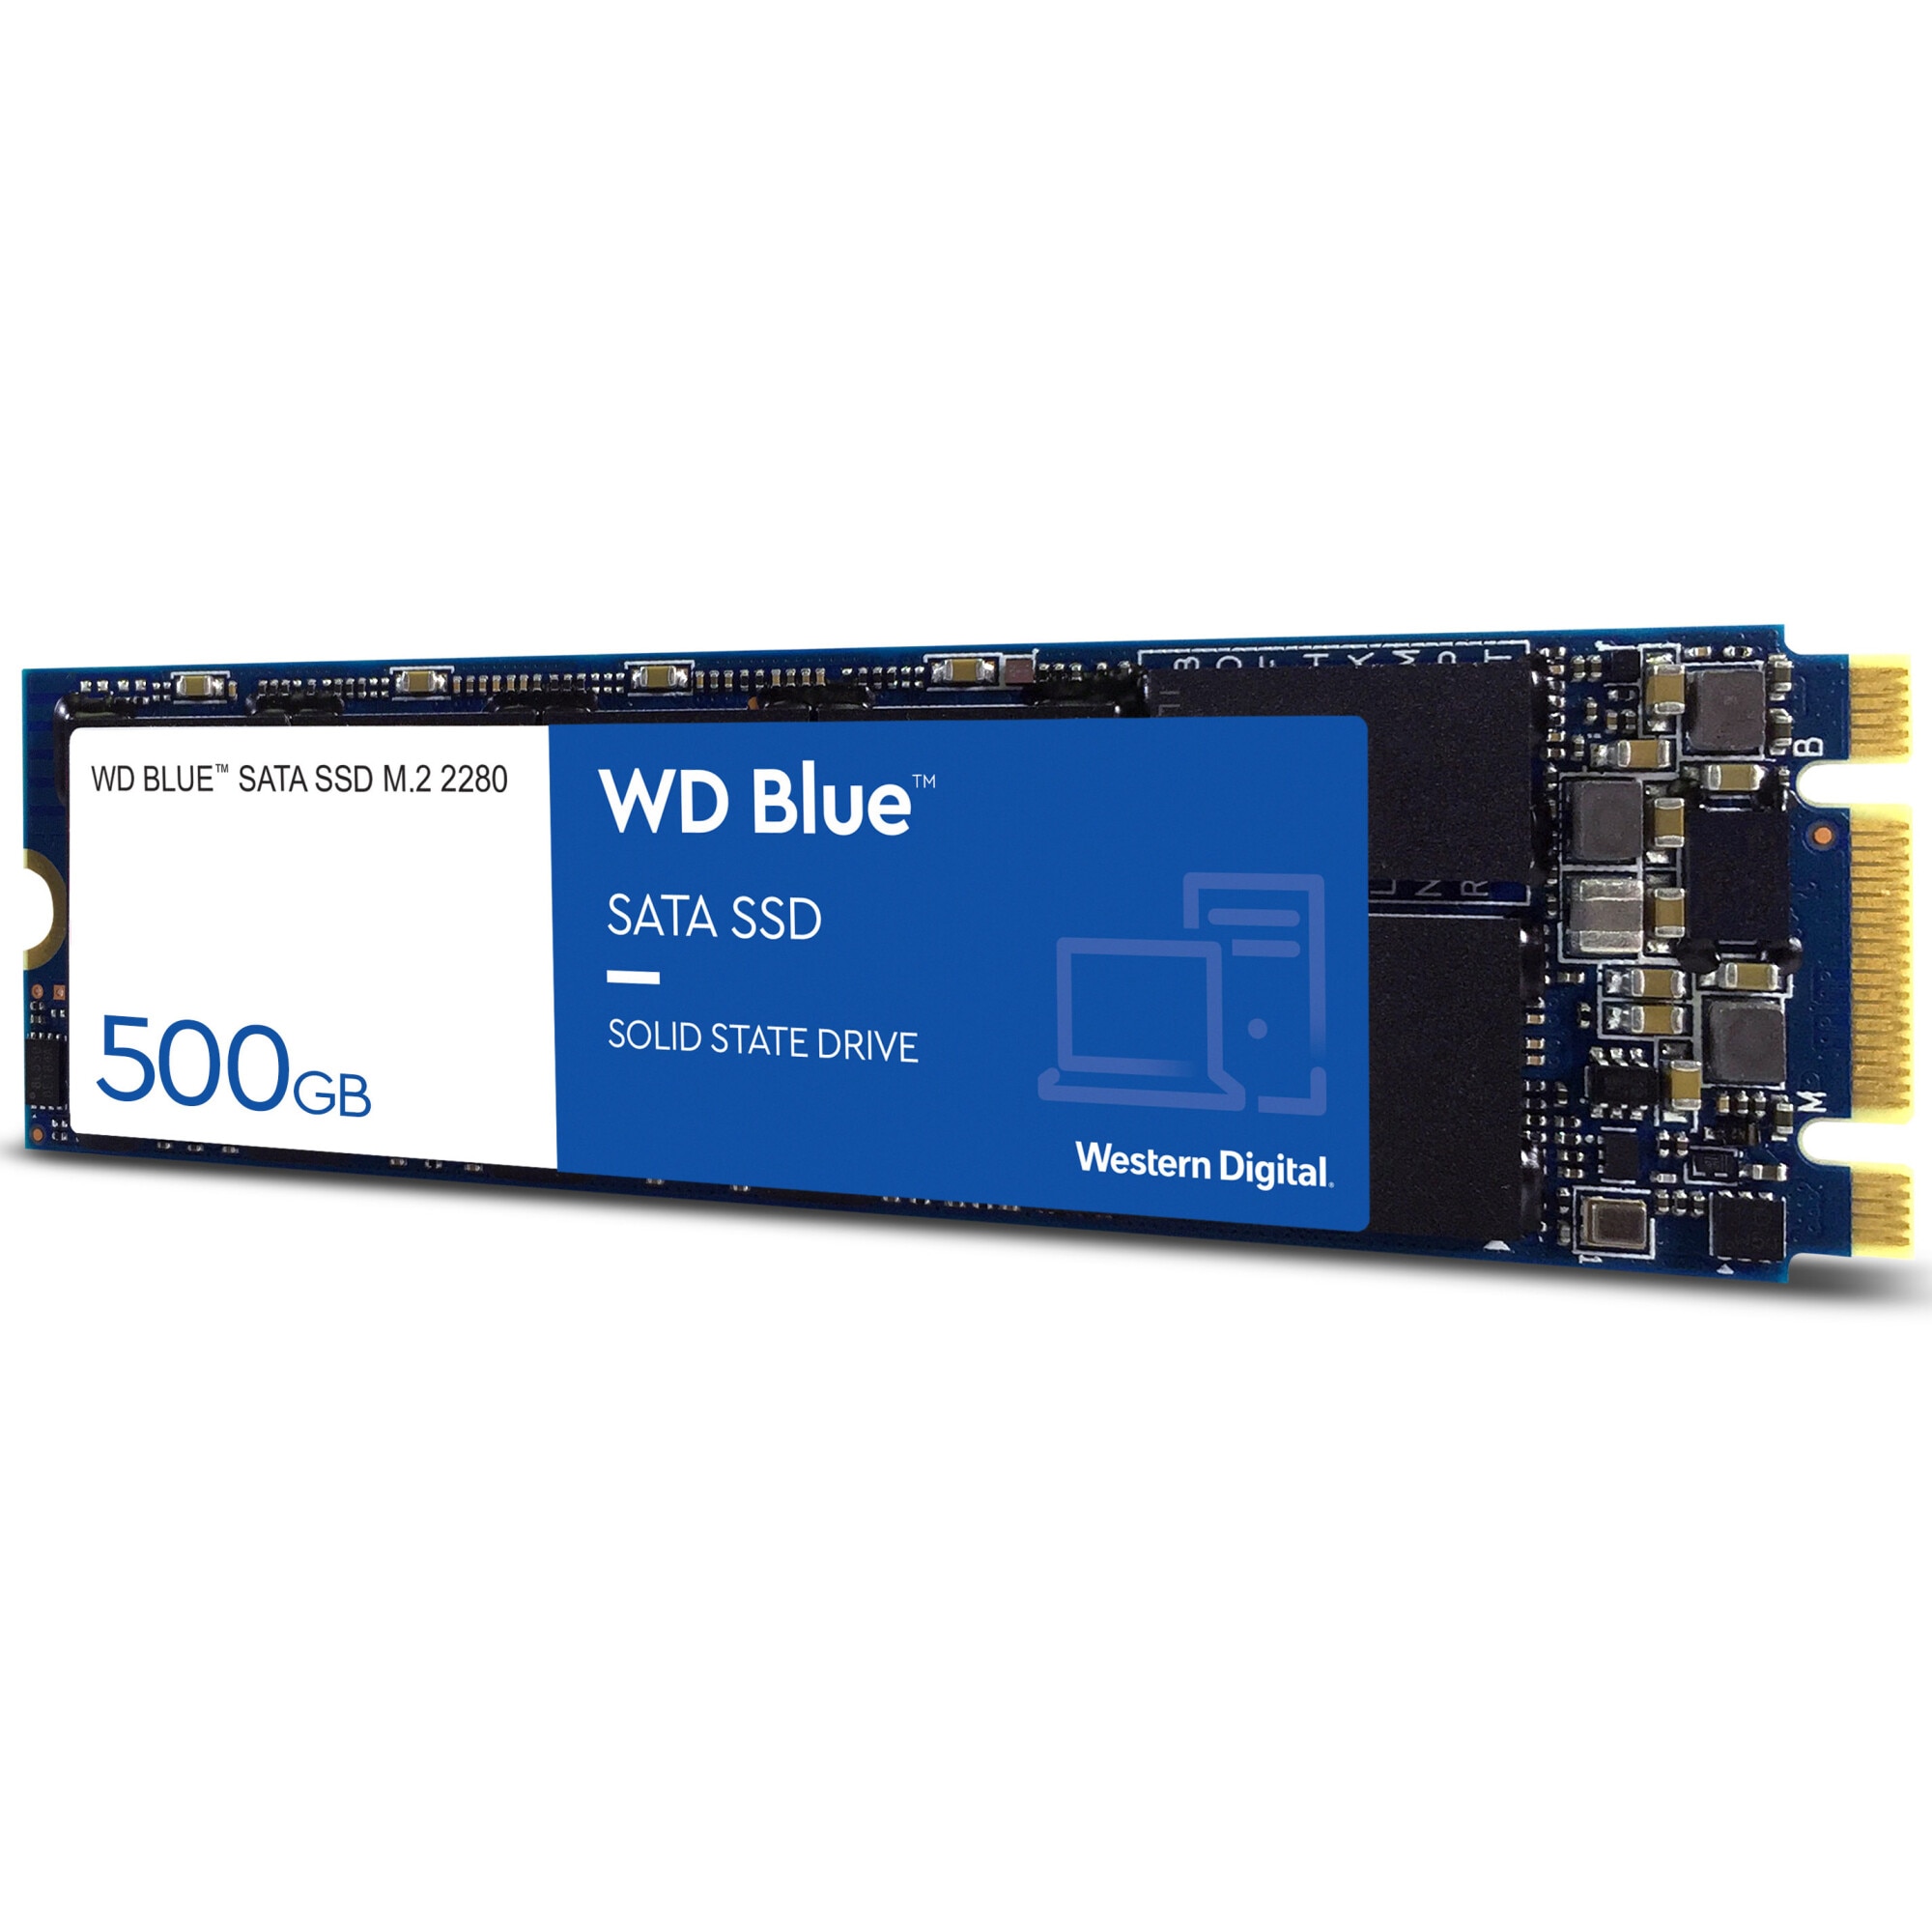 Kent anytime Undulate Solid State Drive (SSD) WD Blue™, 500GB, SATA III, M.2 2280 - eMAG.ro